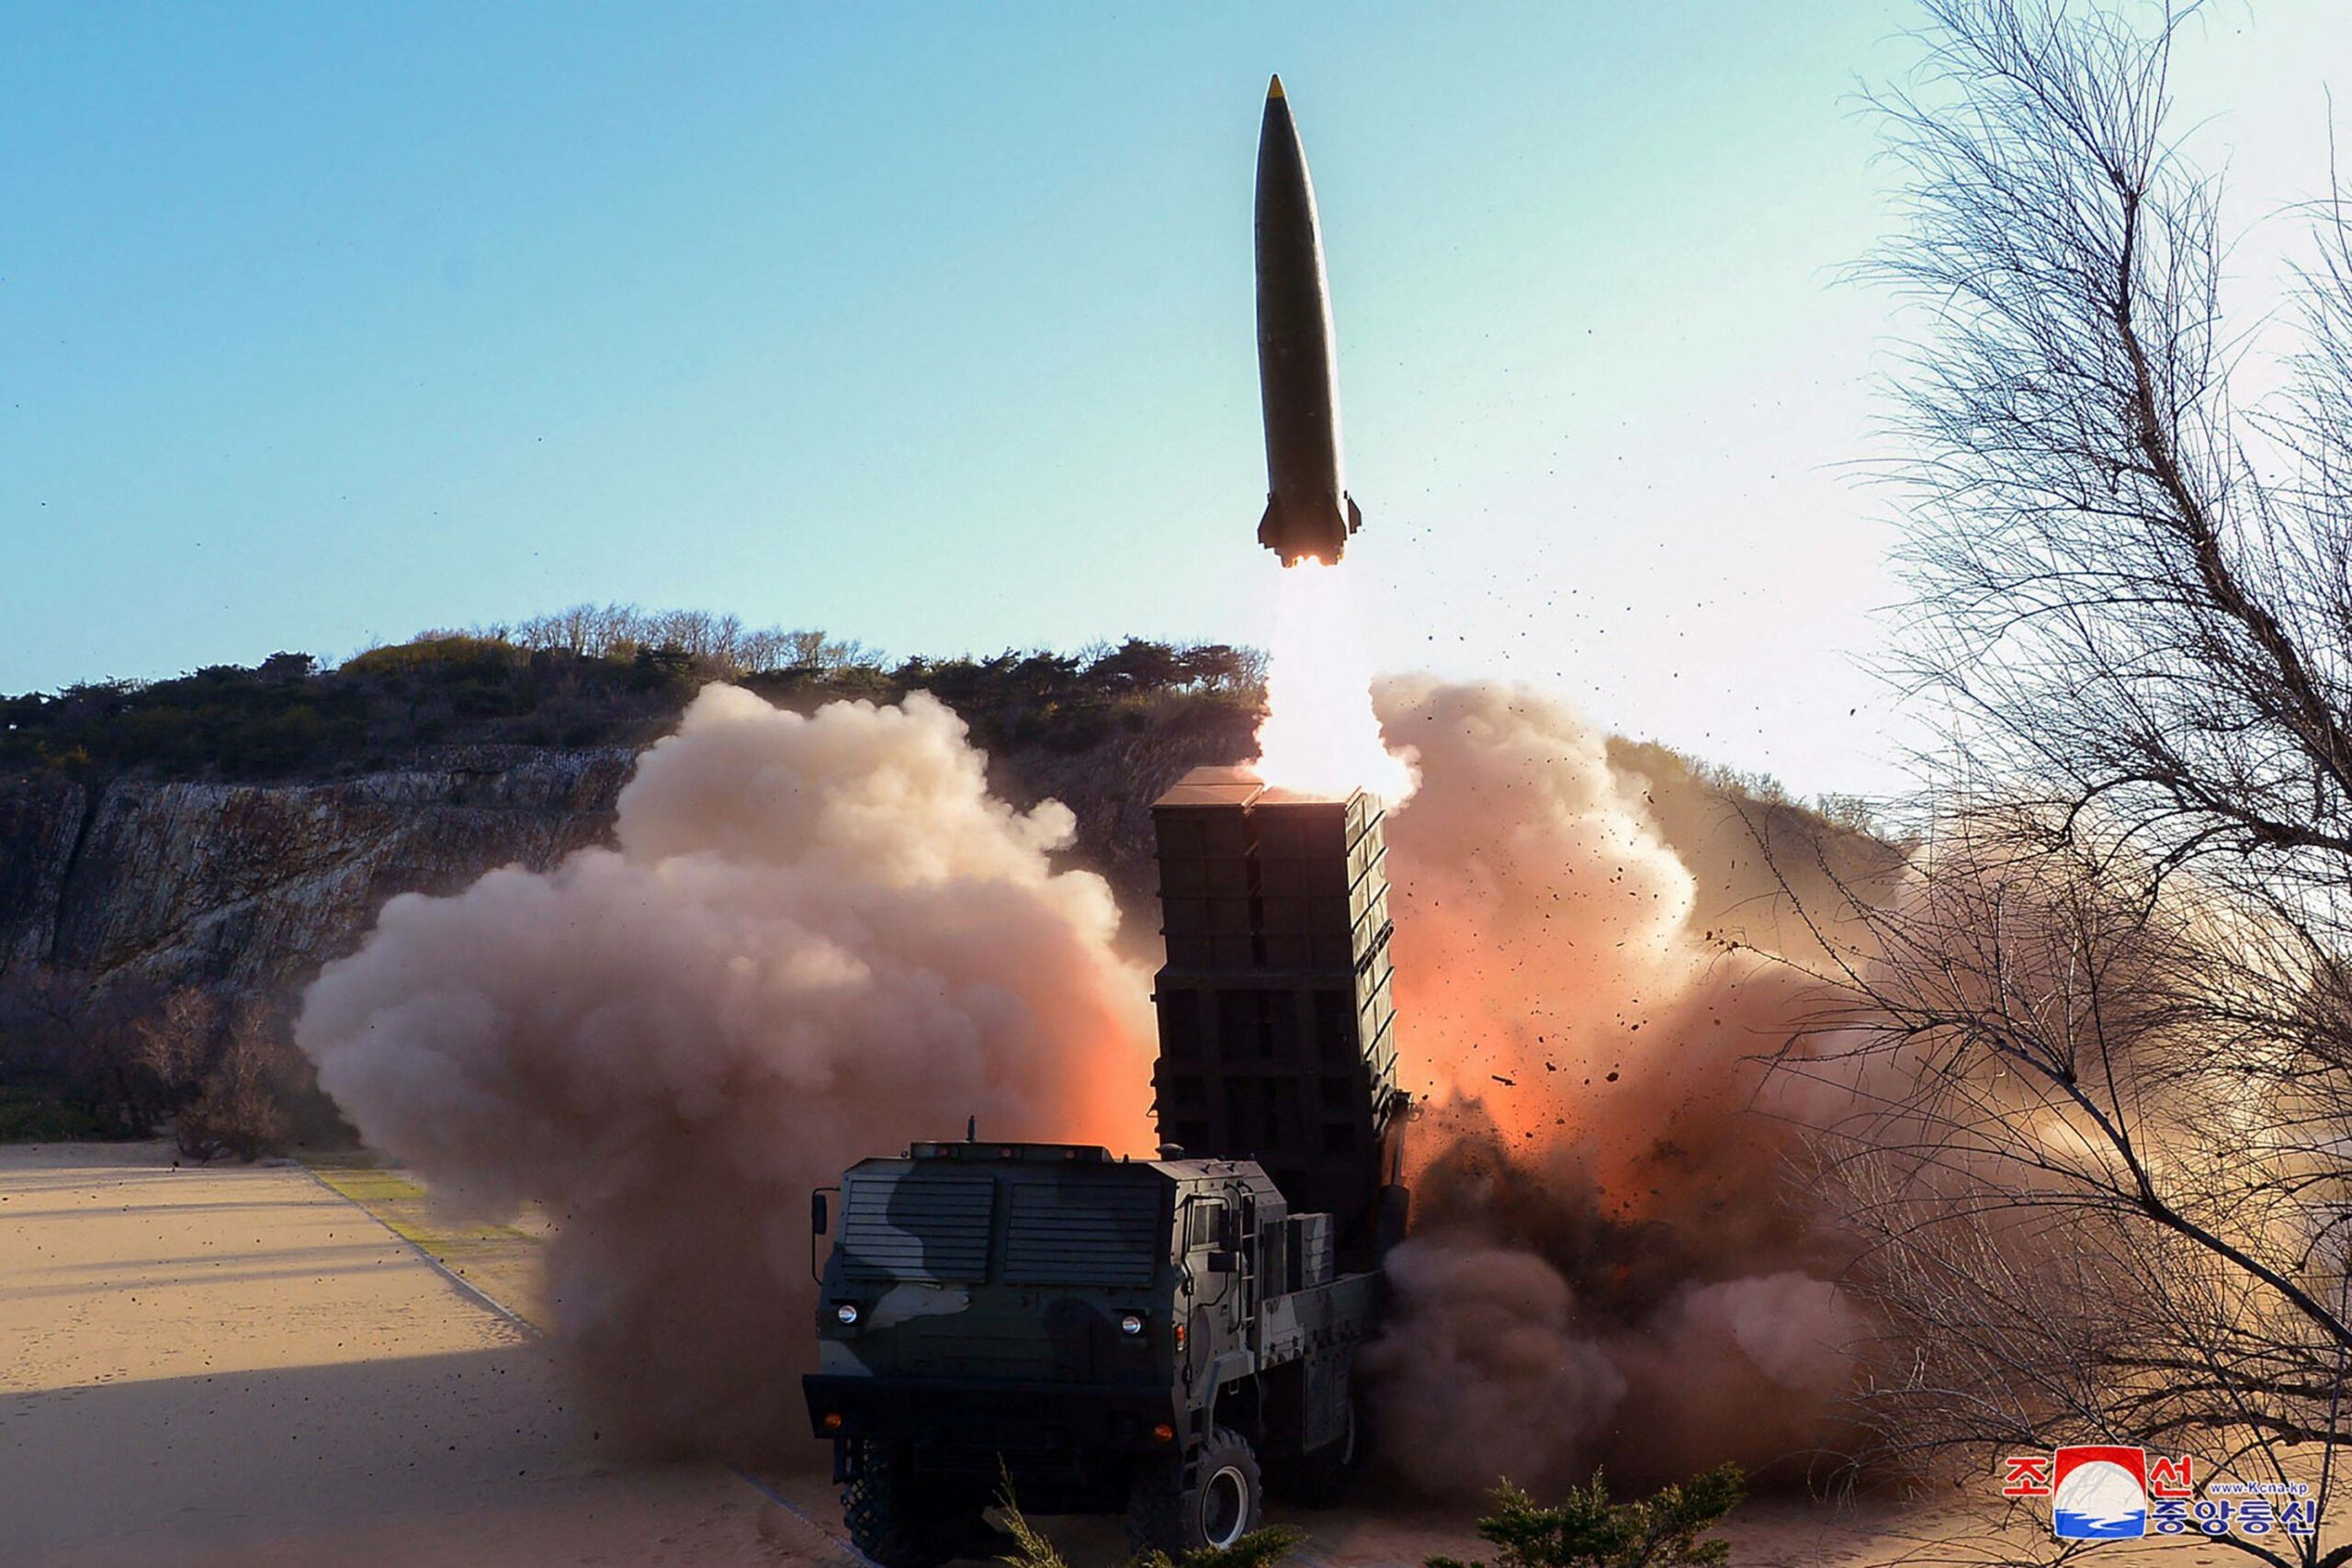 This undated picture released from North Korea's official Korean Central News Agency (KCNA) on April 17, 2022 shows the test-fire of a new-type tactical guided weapon in North Korea